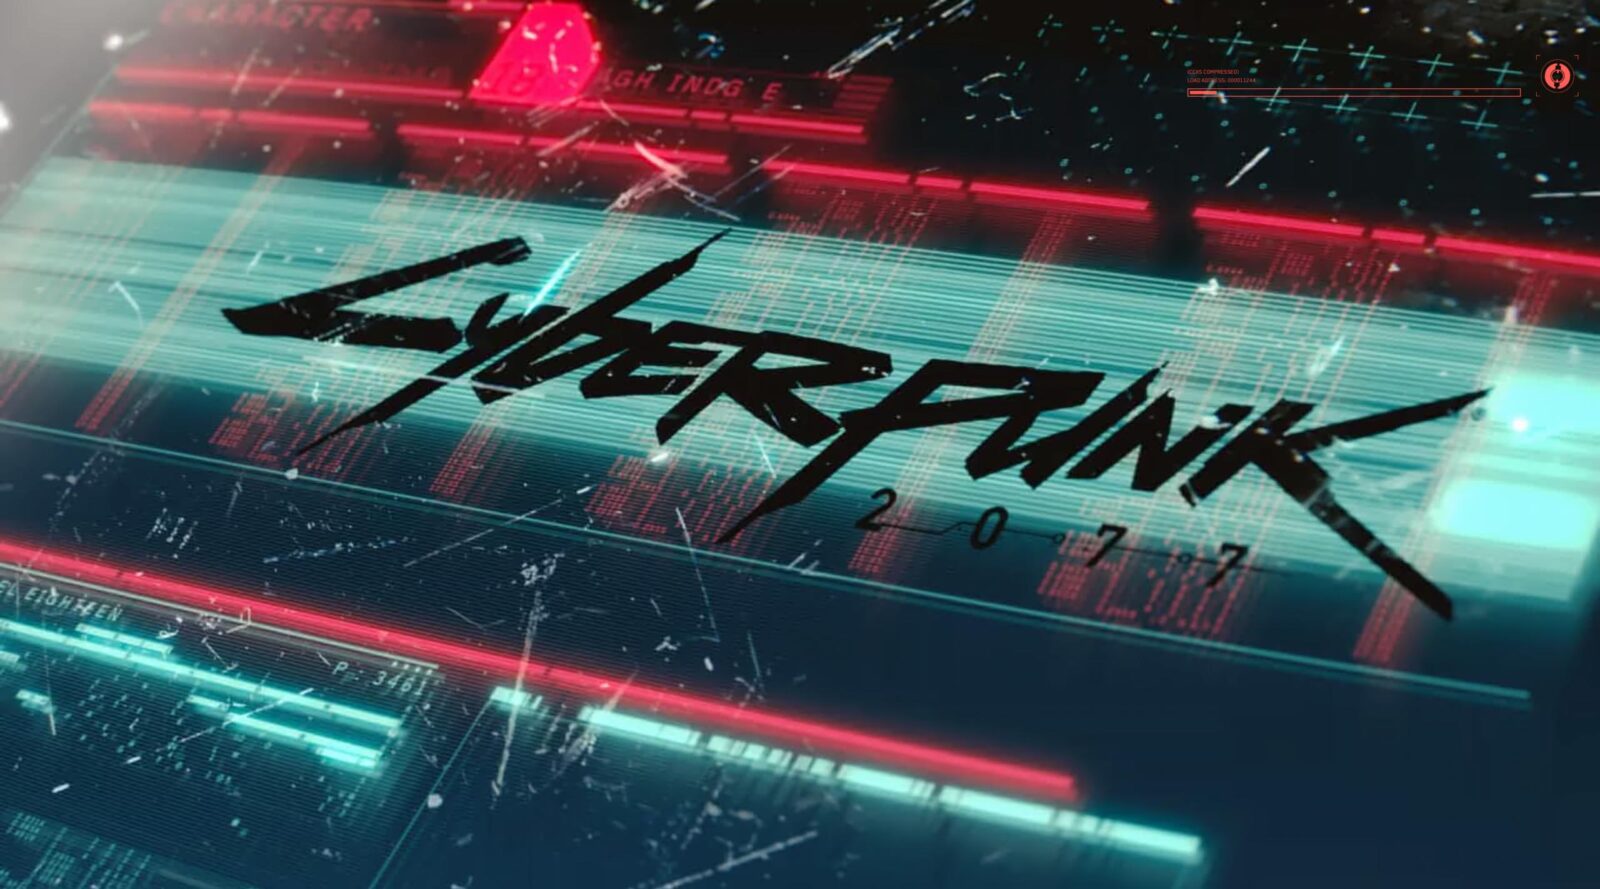 Quick Thoughts – Playing Cyberpunk 2077 on a console is a mistake